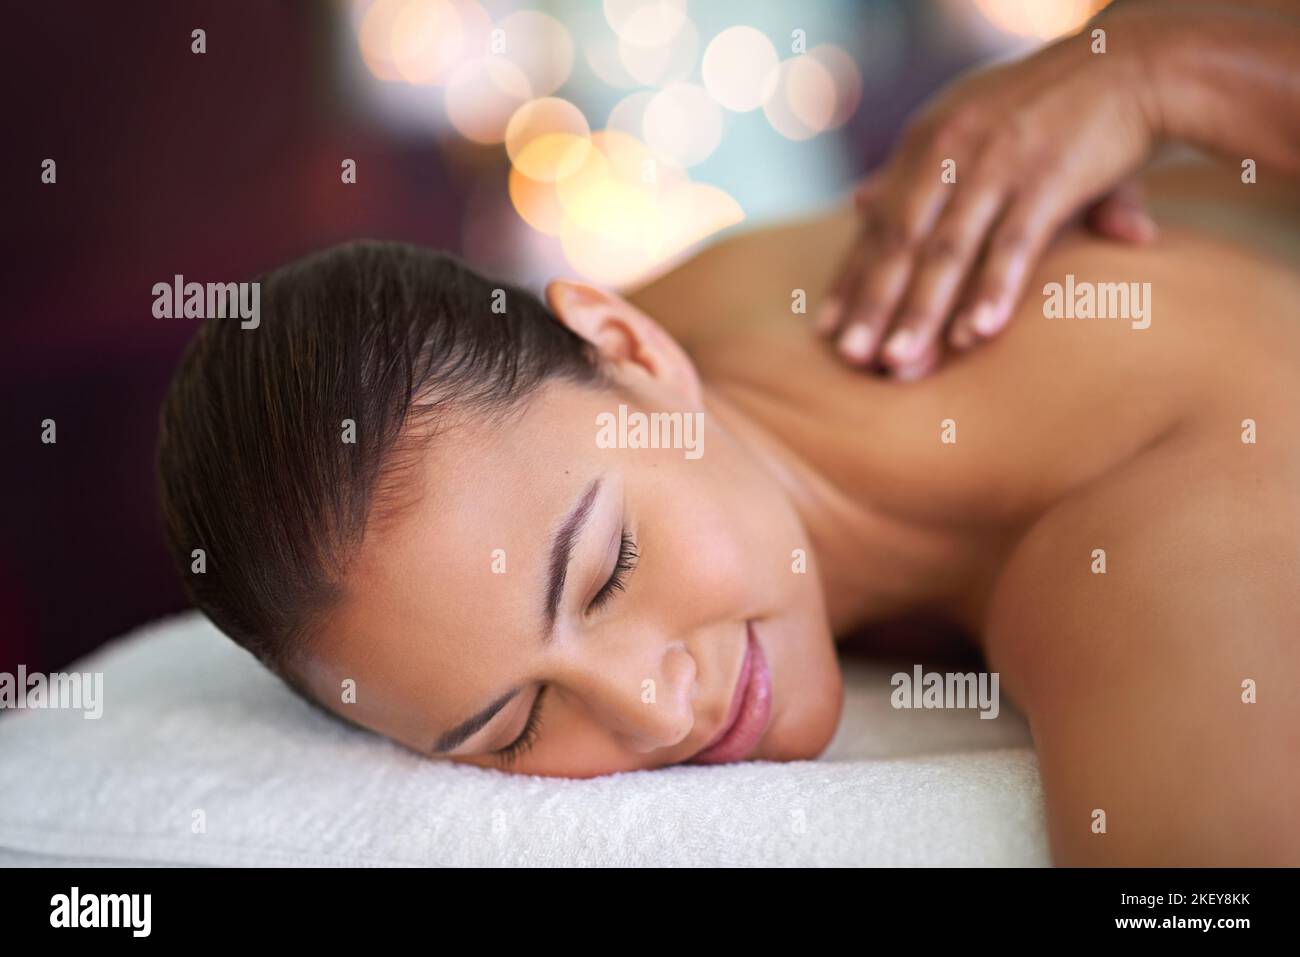 Feel all your tension ease away. an attractive woman enjoying a day at a health spa. Stock Photo